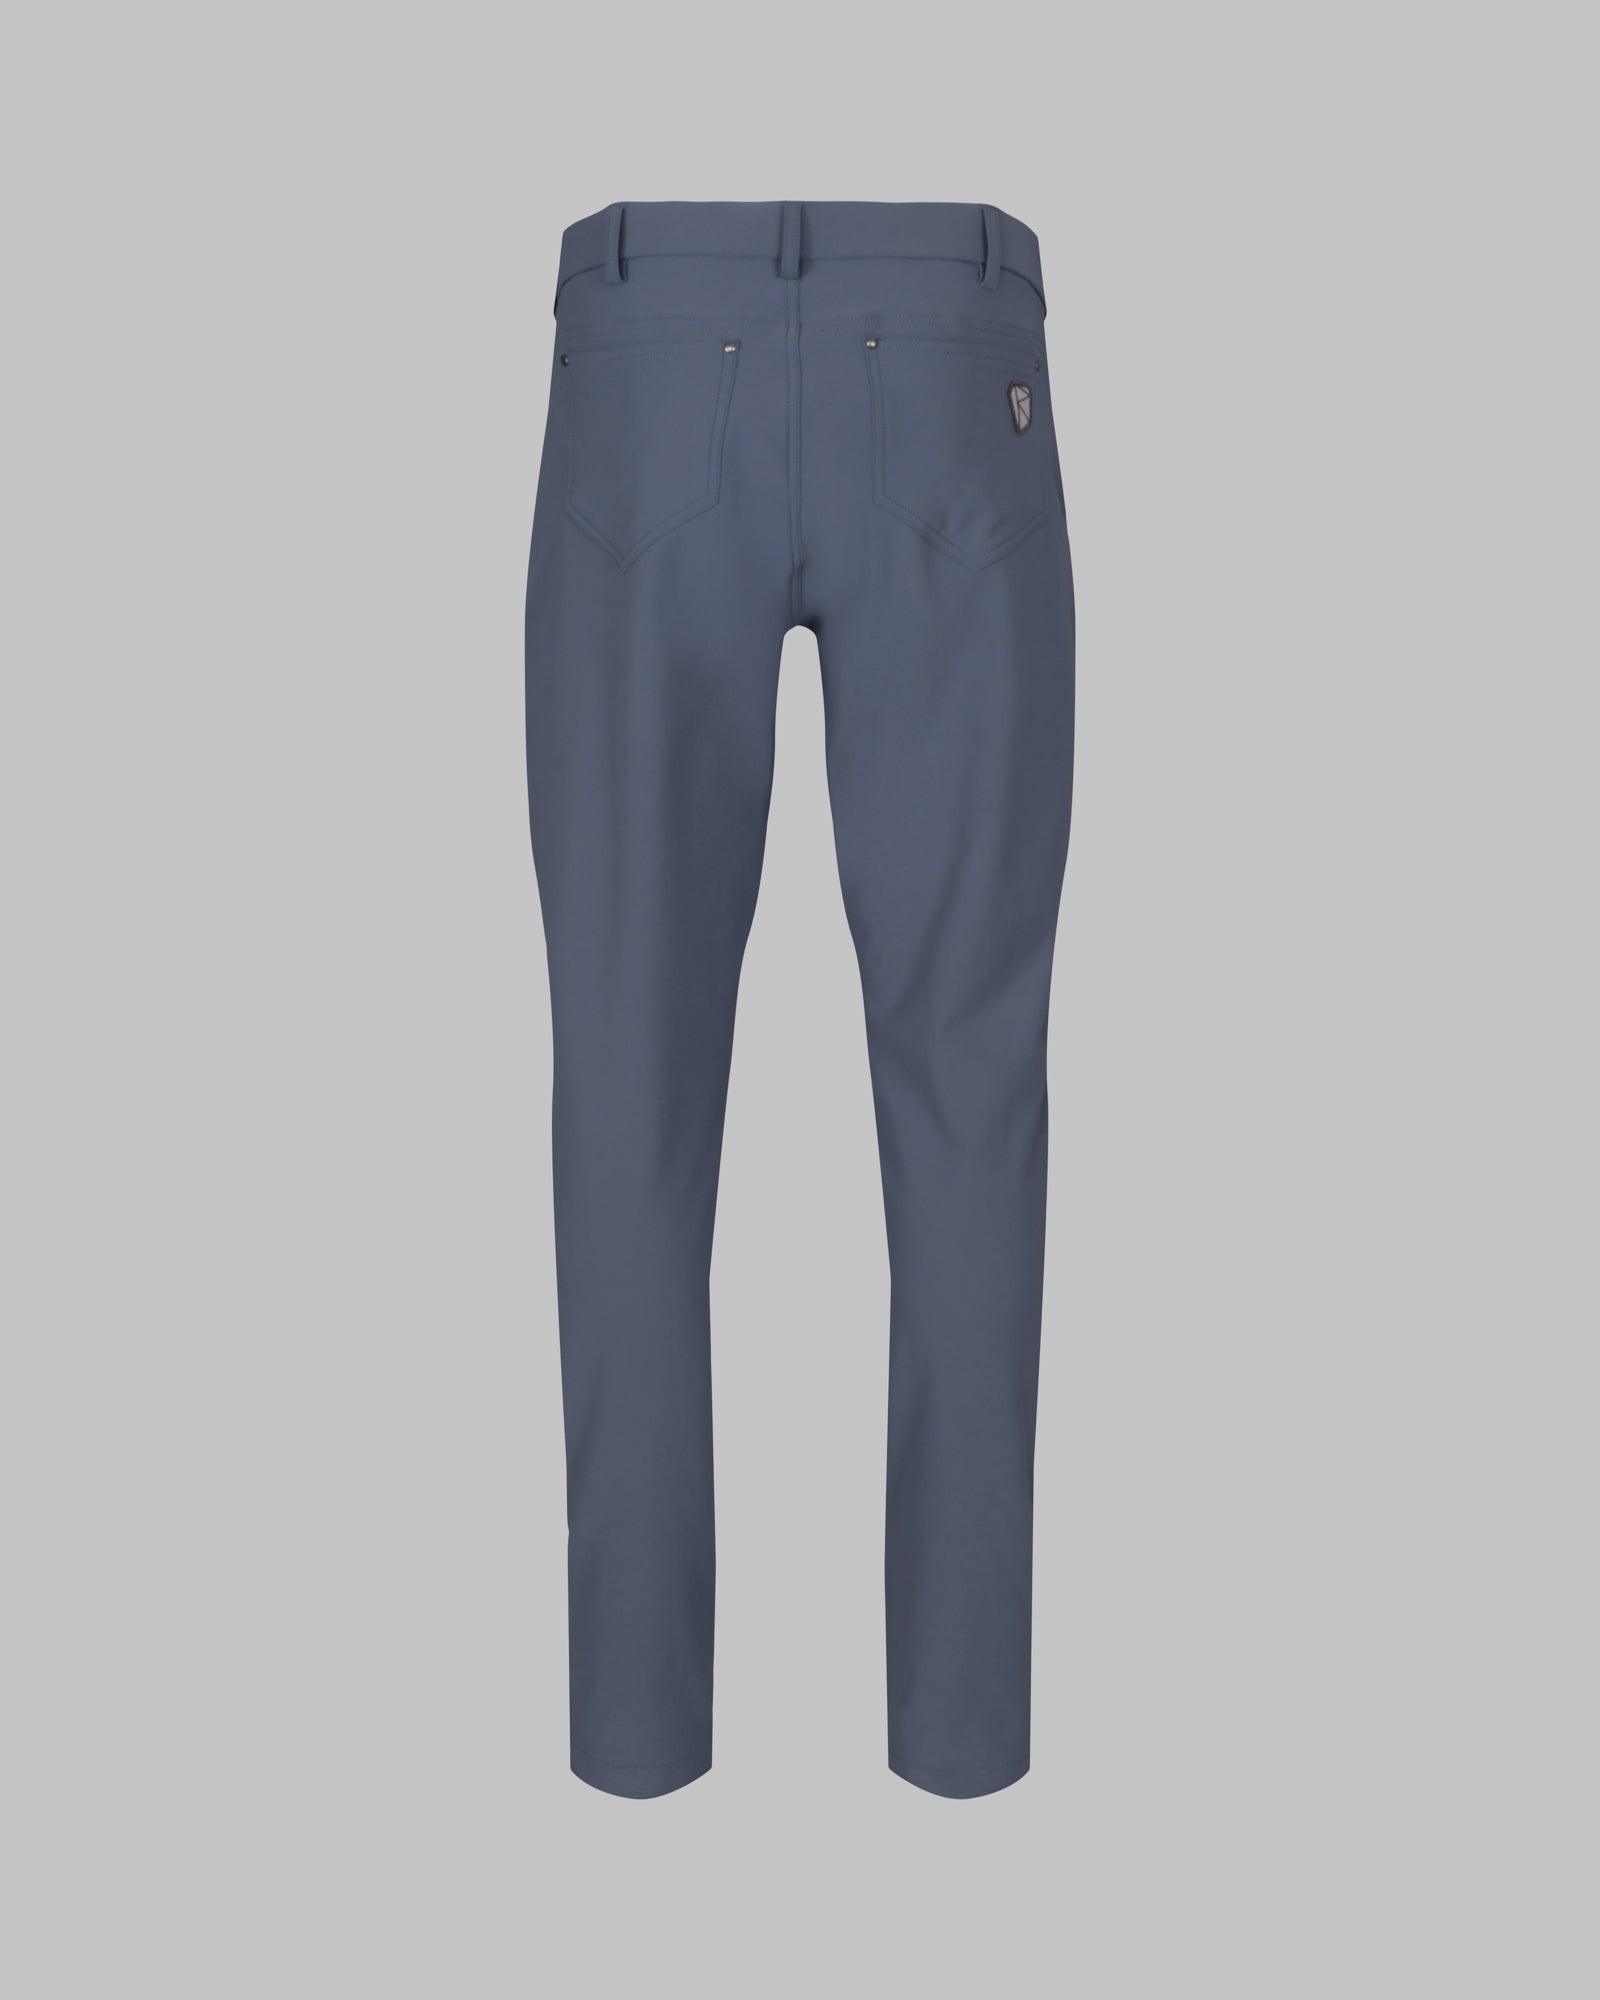 Buy American-Elm Men's Blue Cotton Red Anchor Printed Track Pant Online at  Low Prices in India - Paytmmall.com